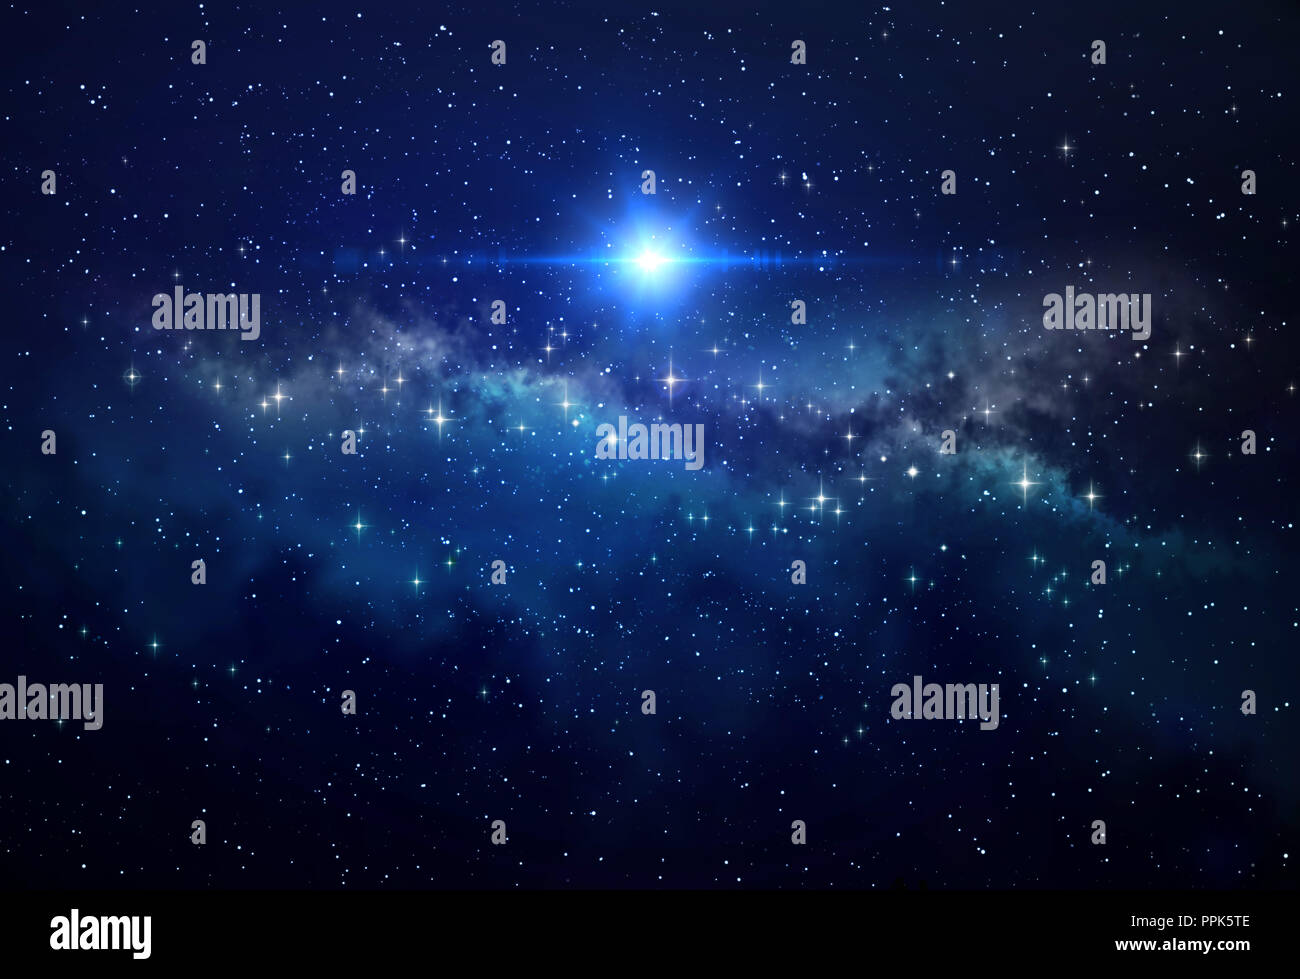 Bright blue star shining in deep space, stellar explosion behind star clusters. High resolution galaxy background. Stock Photo